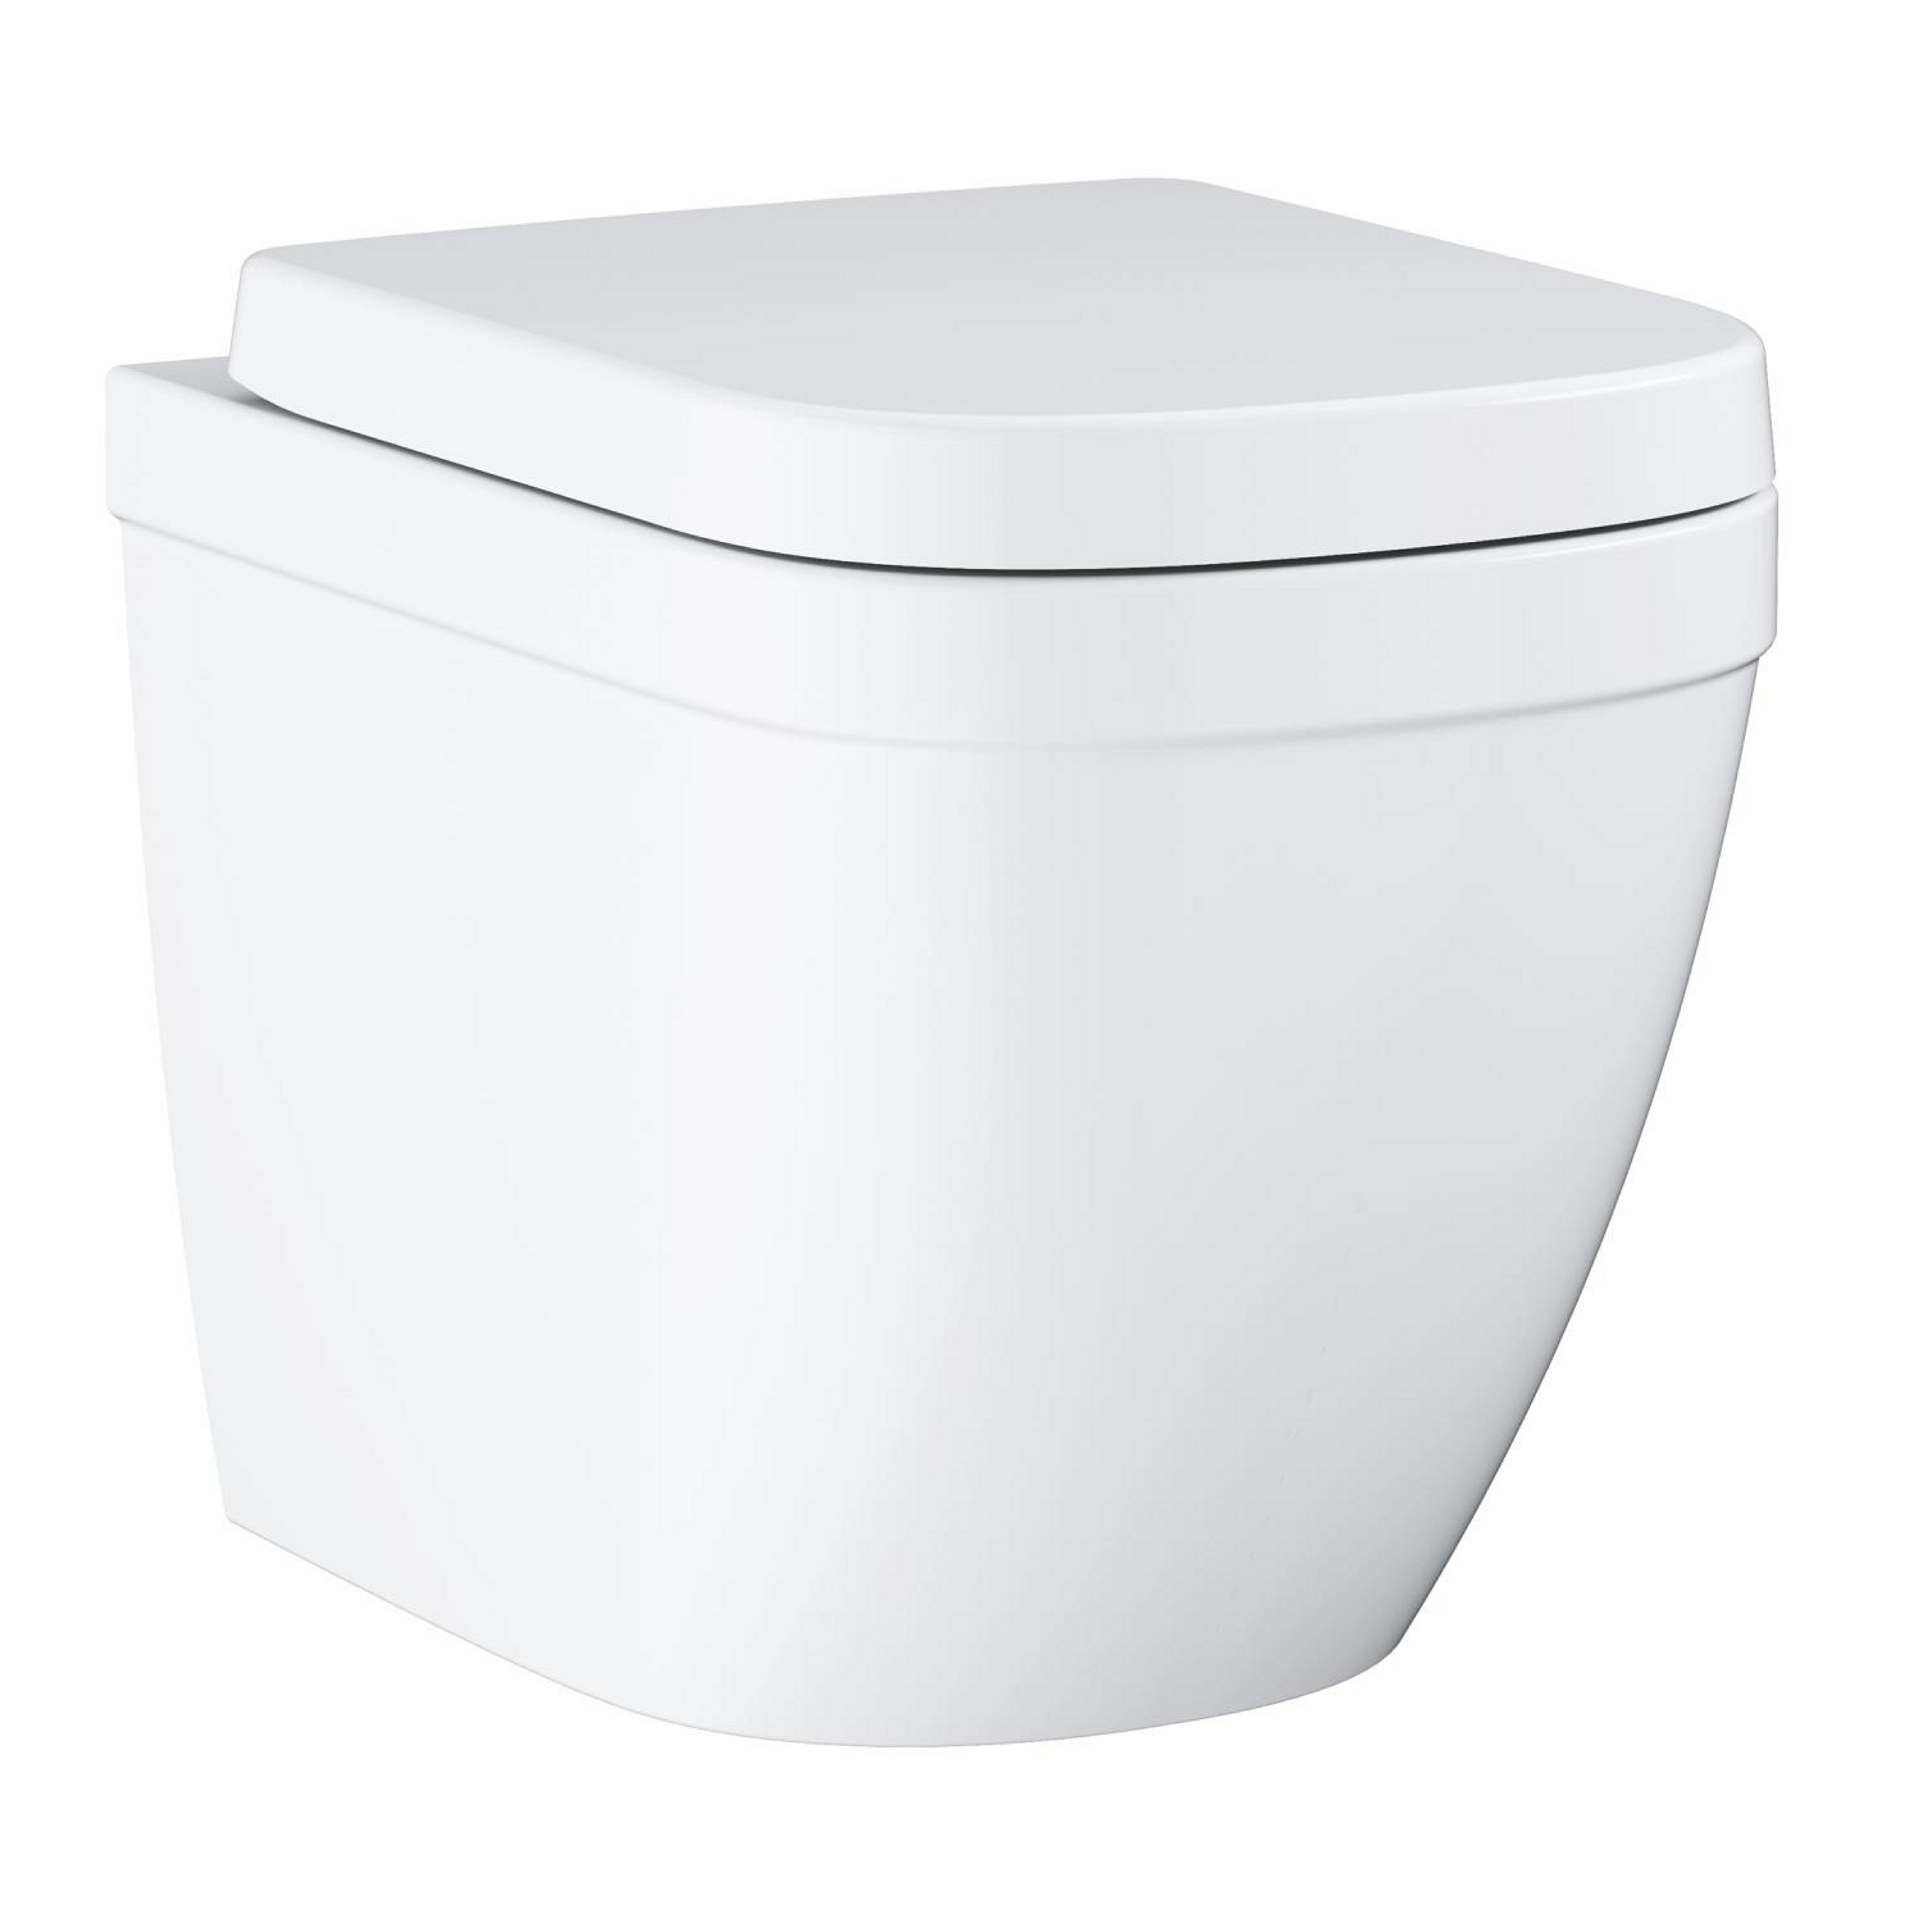 Grohe Euro Even Alpine White Standard Back to wall close-coupled Oval Toilet & cistern with Soft close seat & matt black plate